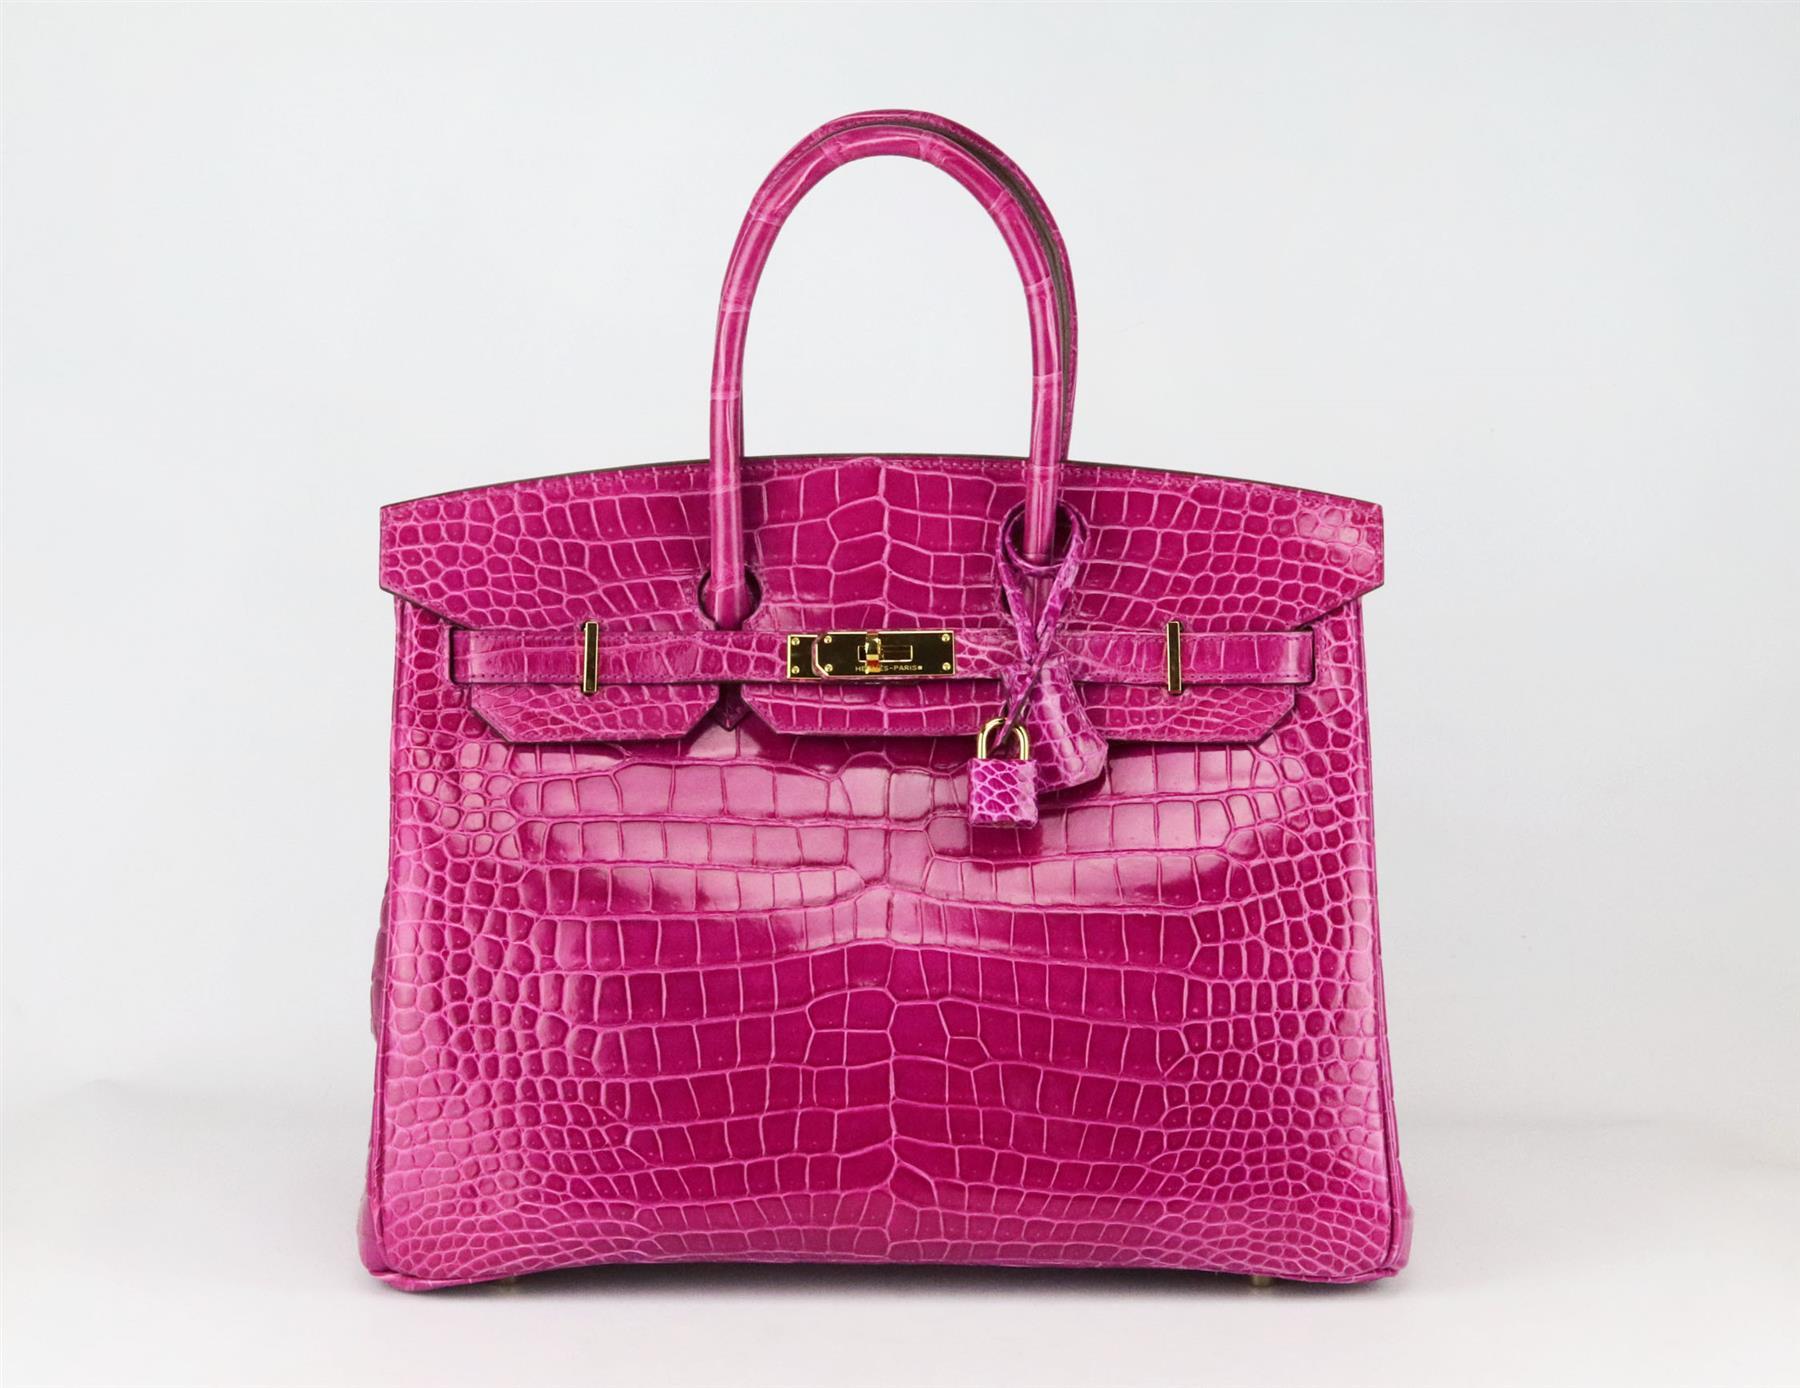 Made in France, this beautiful 2008 Hermès ‘Birkin’ 35cm handbag has been made from shiny Porosus Crocodile exterior in ‘Rose Scheherazade’ pink and matching leather interior, this piece is decorated with gold hardware on the front and finished with